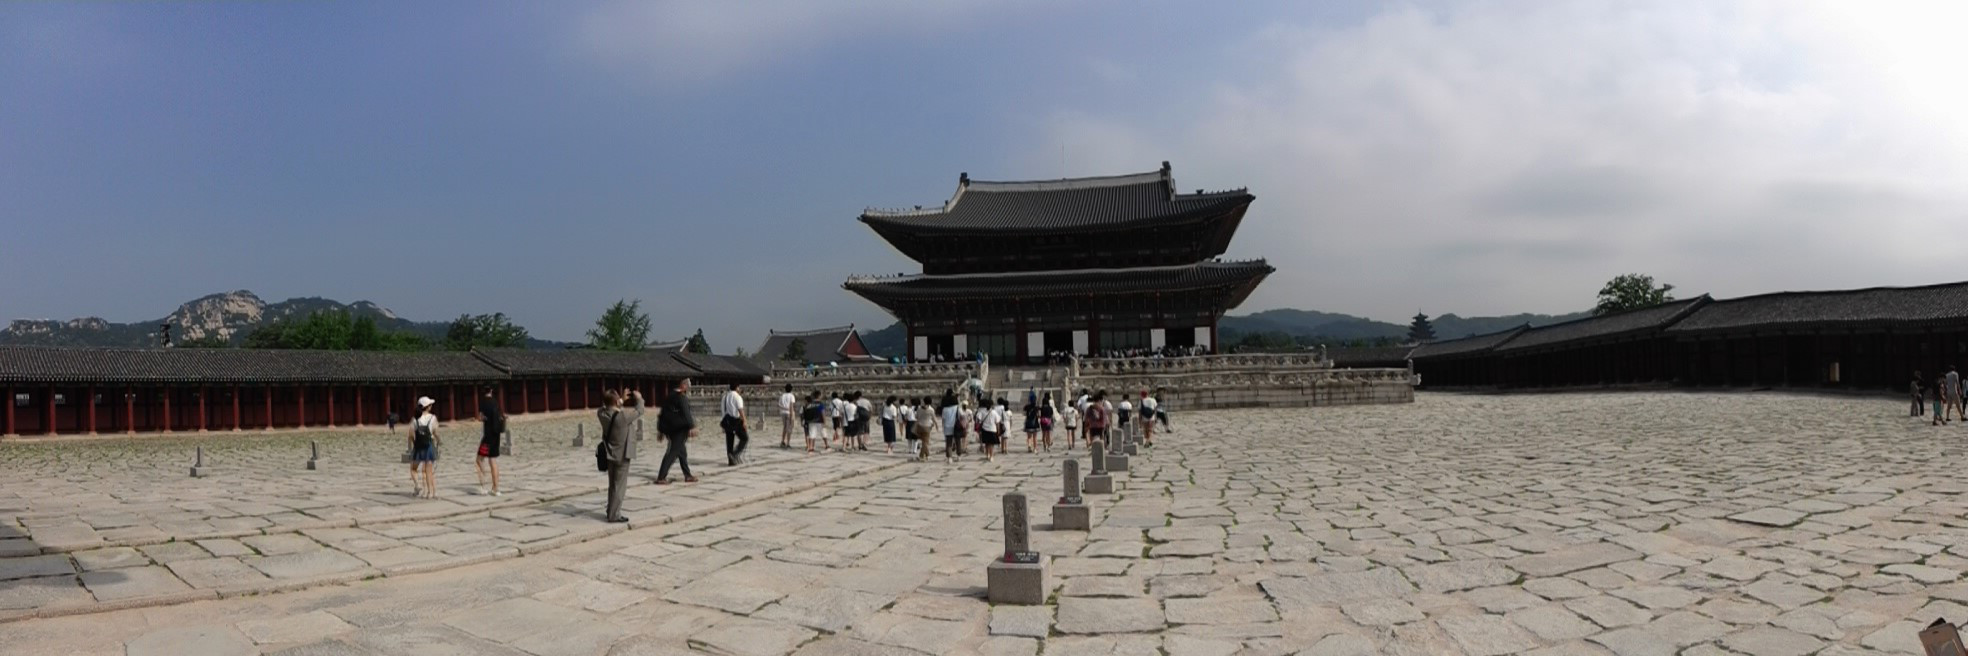 Gyeongbokgung Palace was just a few steps away from our doorstep!